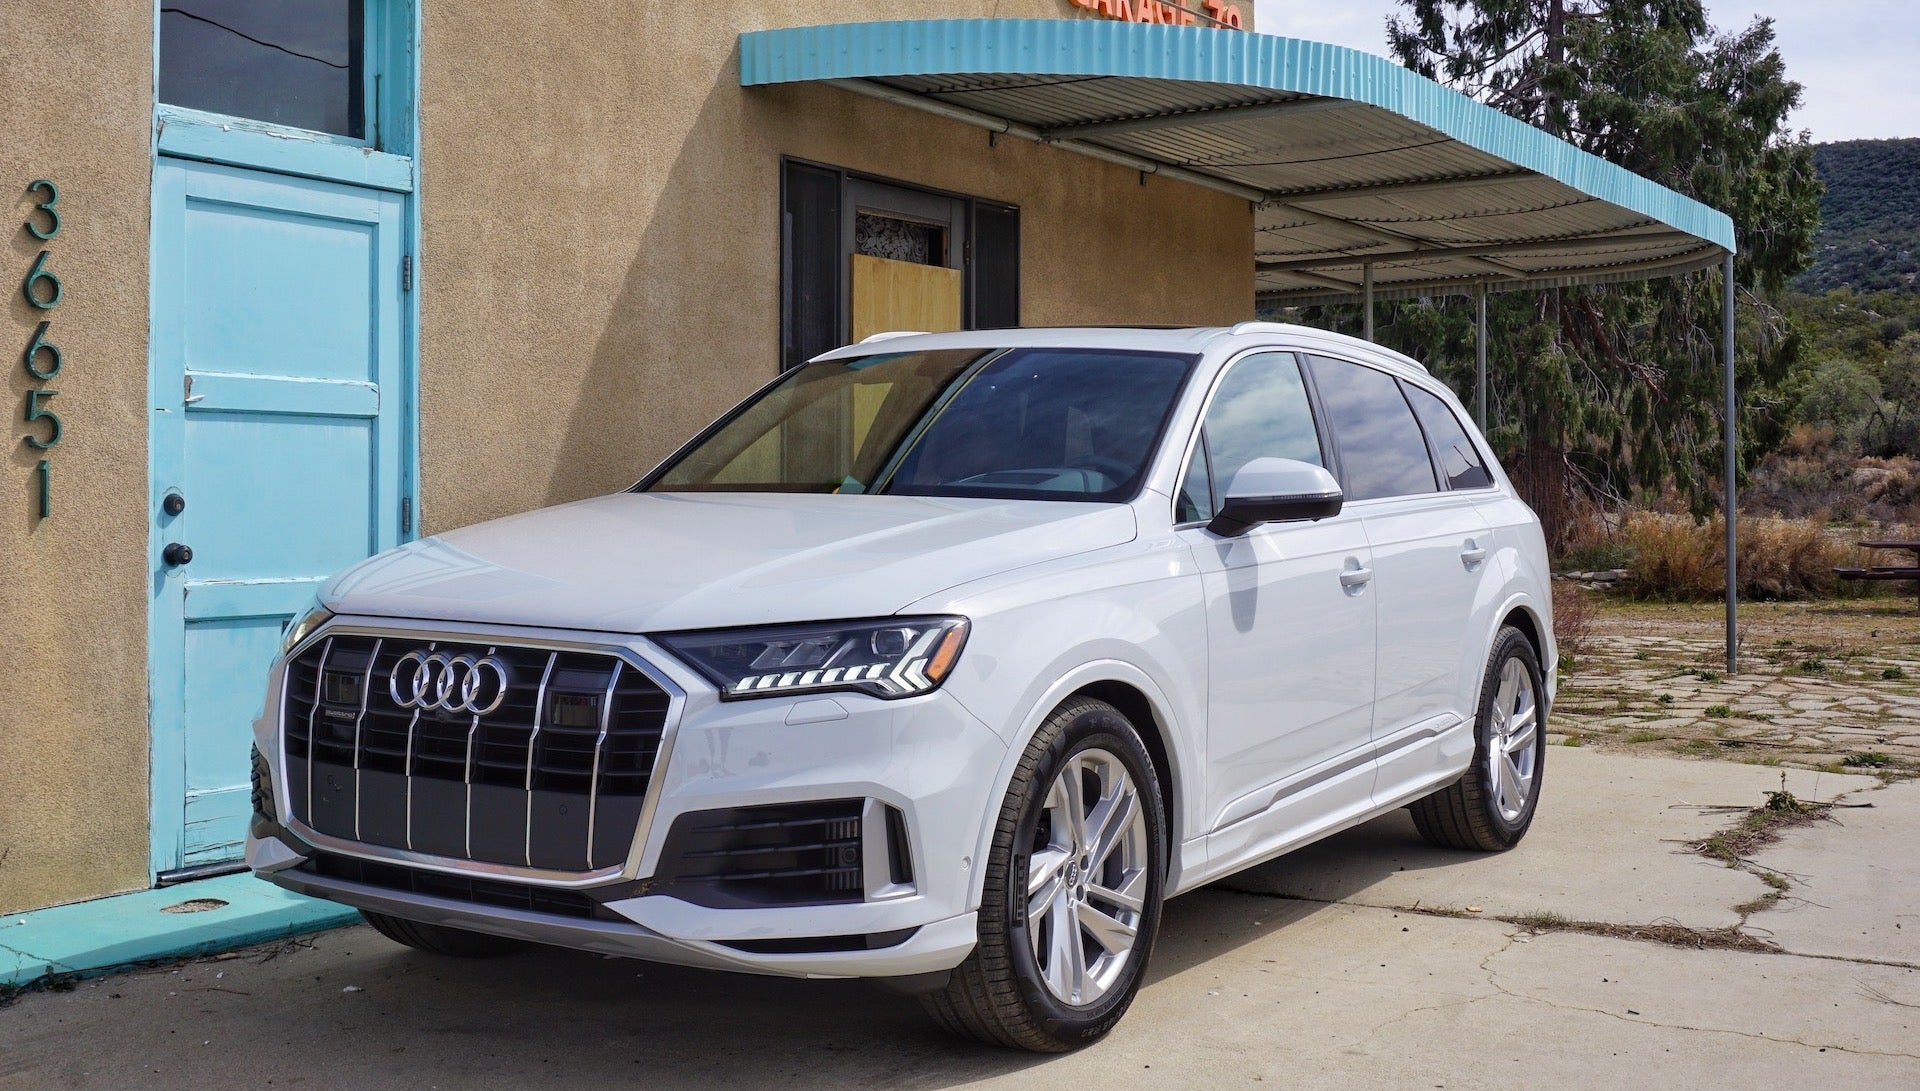 2020 Audi Q7 First Drive Review: A Damn Good Luxury SUV | The Drive